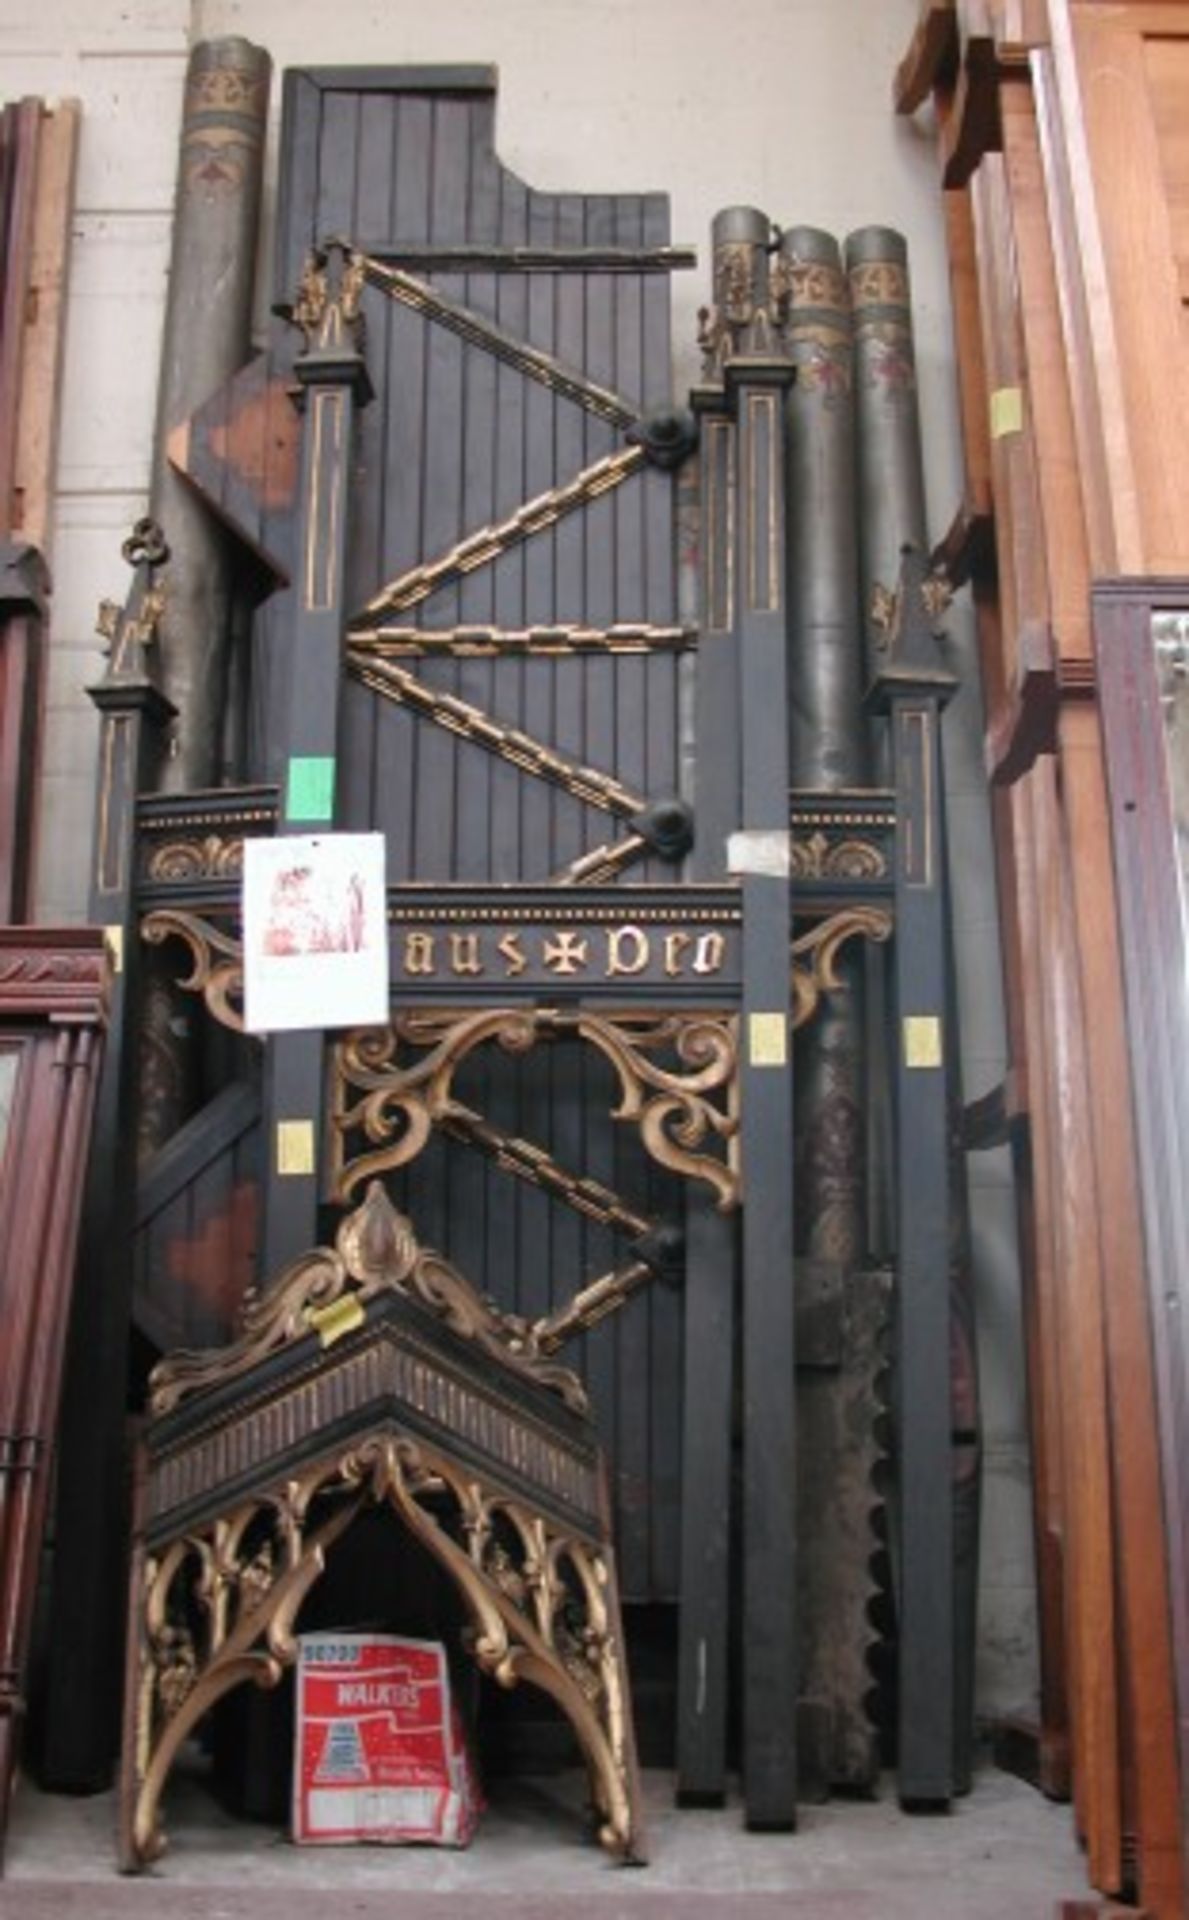 *CARVED, EBONISED GOTHIC ORGAN CASE WOODWORK WITH GOLD PAINTED DETAILS, CIRCA 1860. 2680MM (105.5IN) - Image 8 of 9